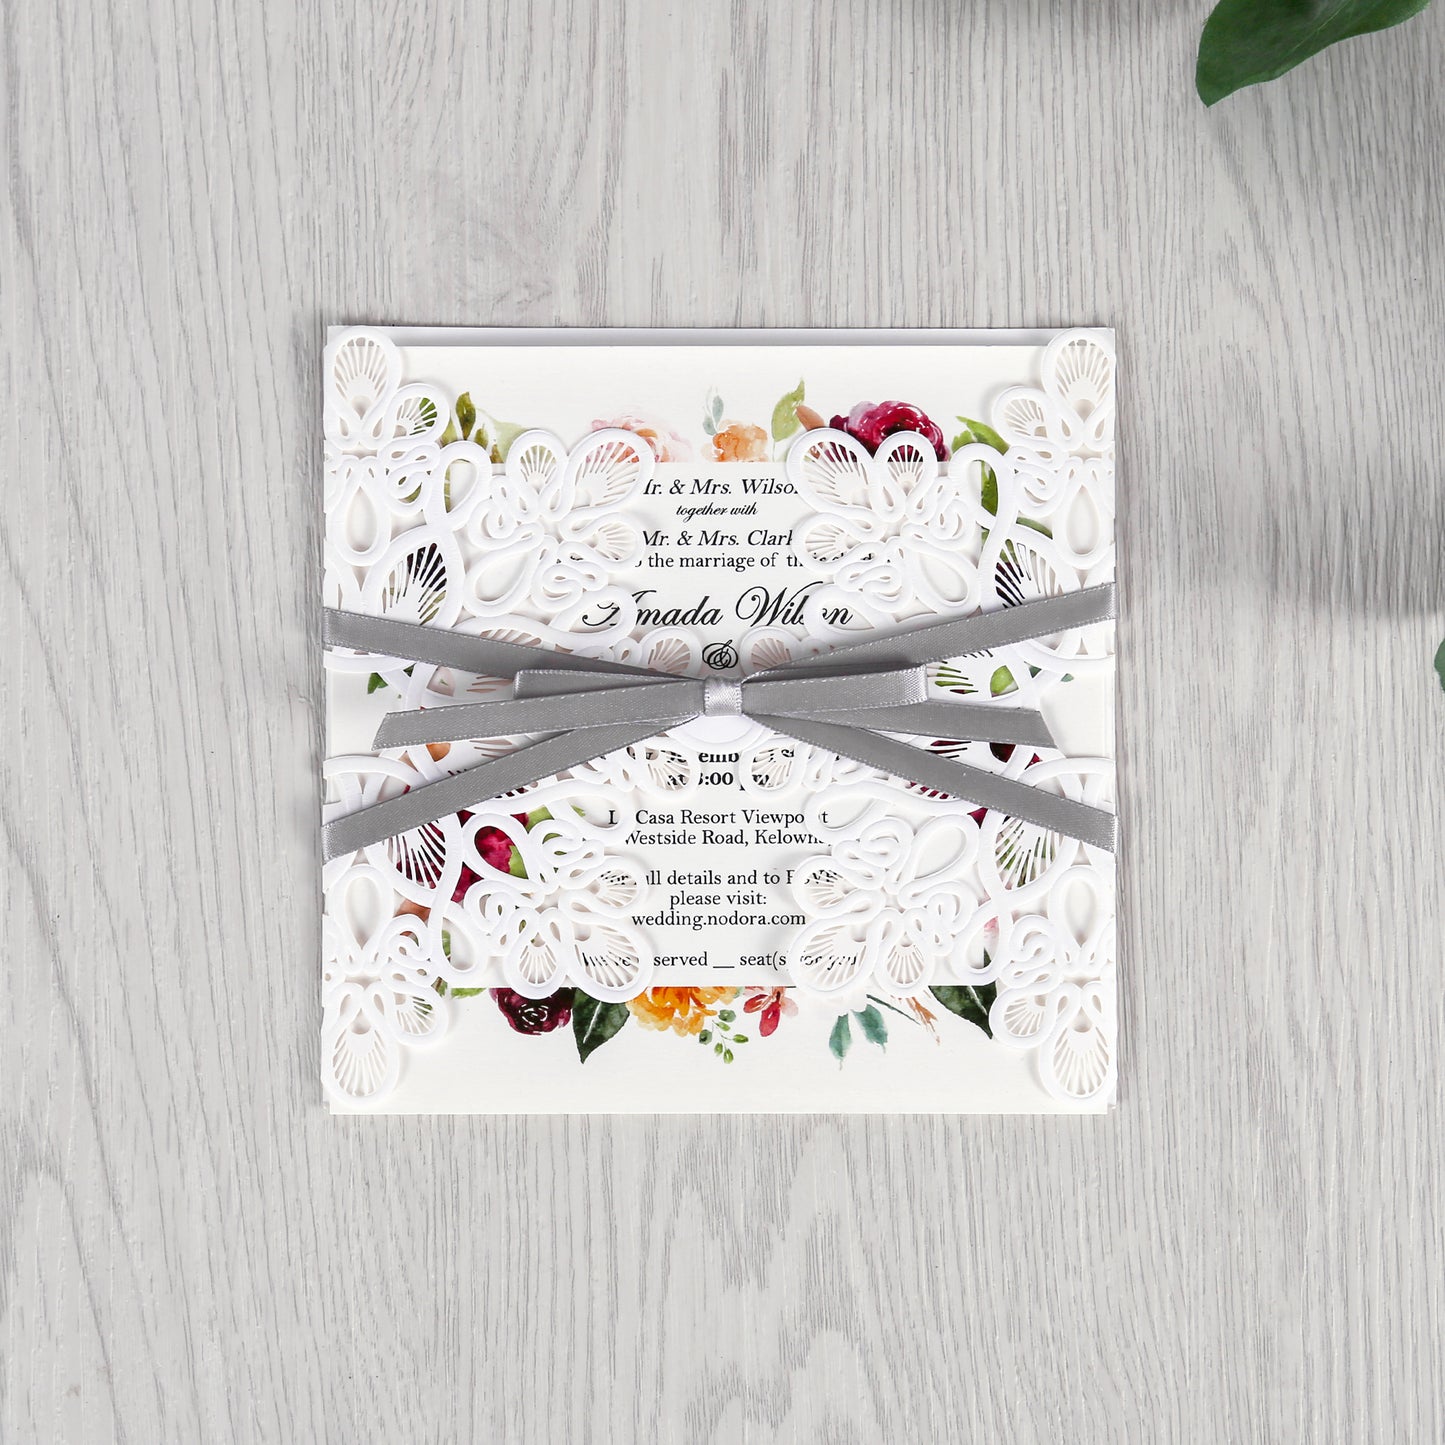 White Laser Cut with Gray Bowknot wedding invitation